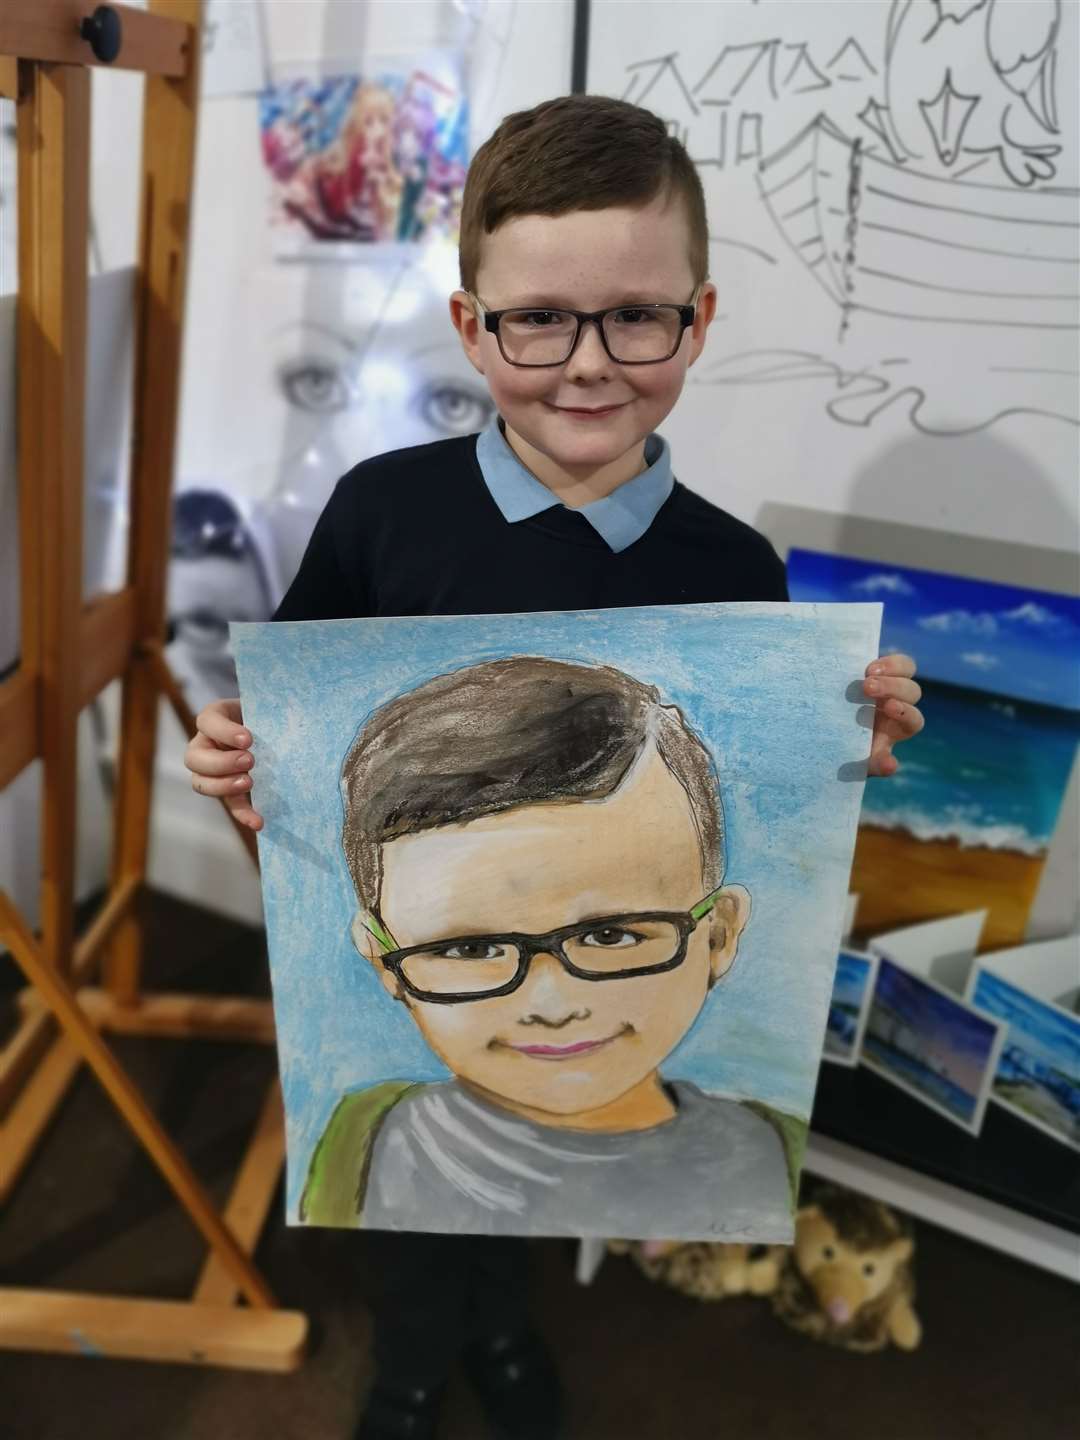 Ramsgate child prodigy, seven, nicknamed Vincent Van Gogh for his